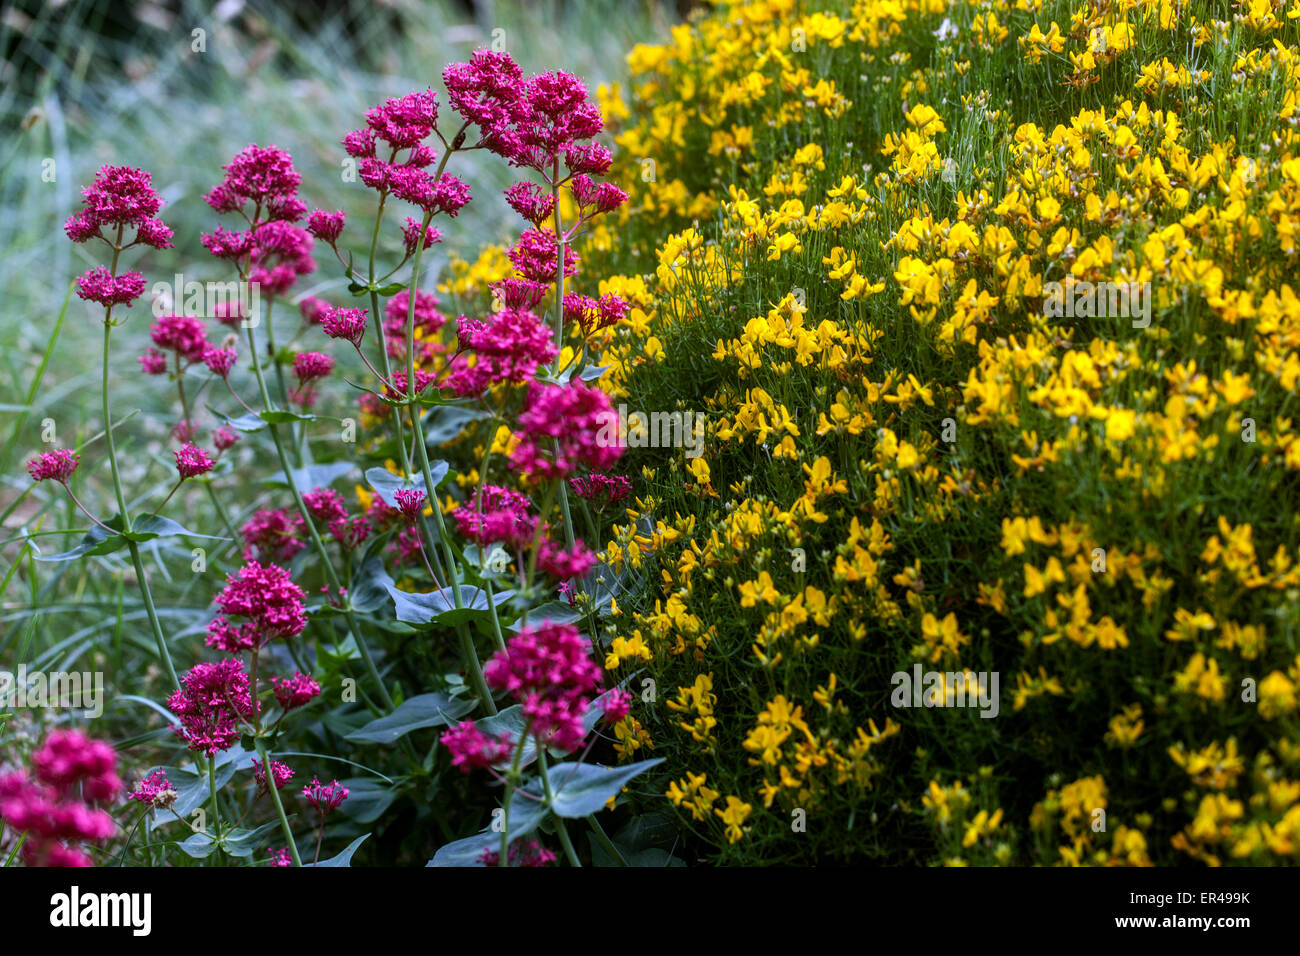 Rouge Centranthus ruber coccineus Genista radiata Genista Garden Rayed Broom Star Broom Yellow Flowers Spring tufted floraison Prickly Compact Low Shrub Banque D'Images